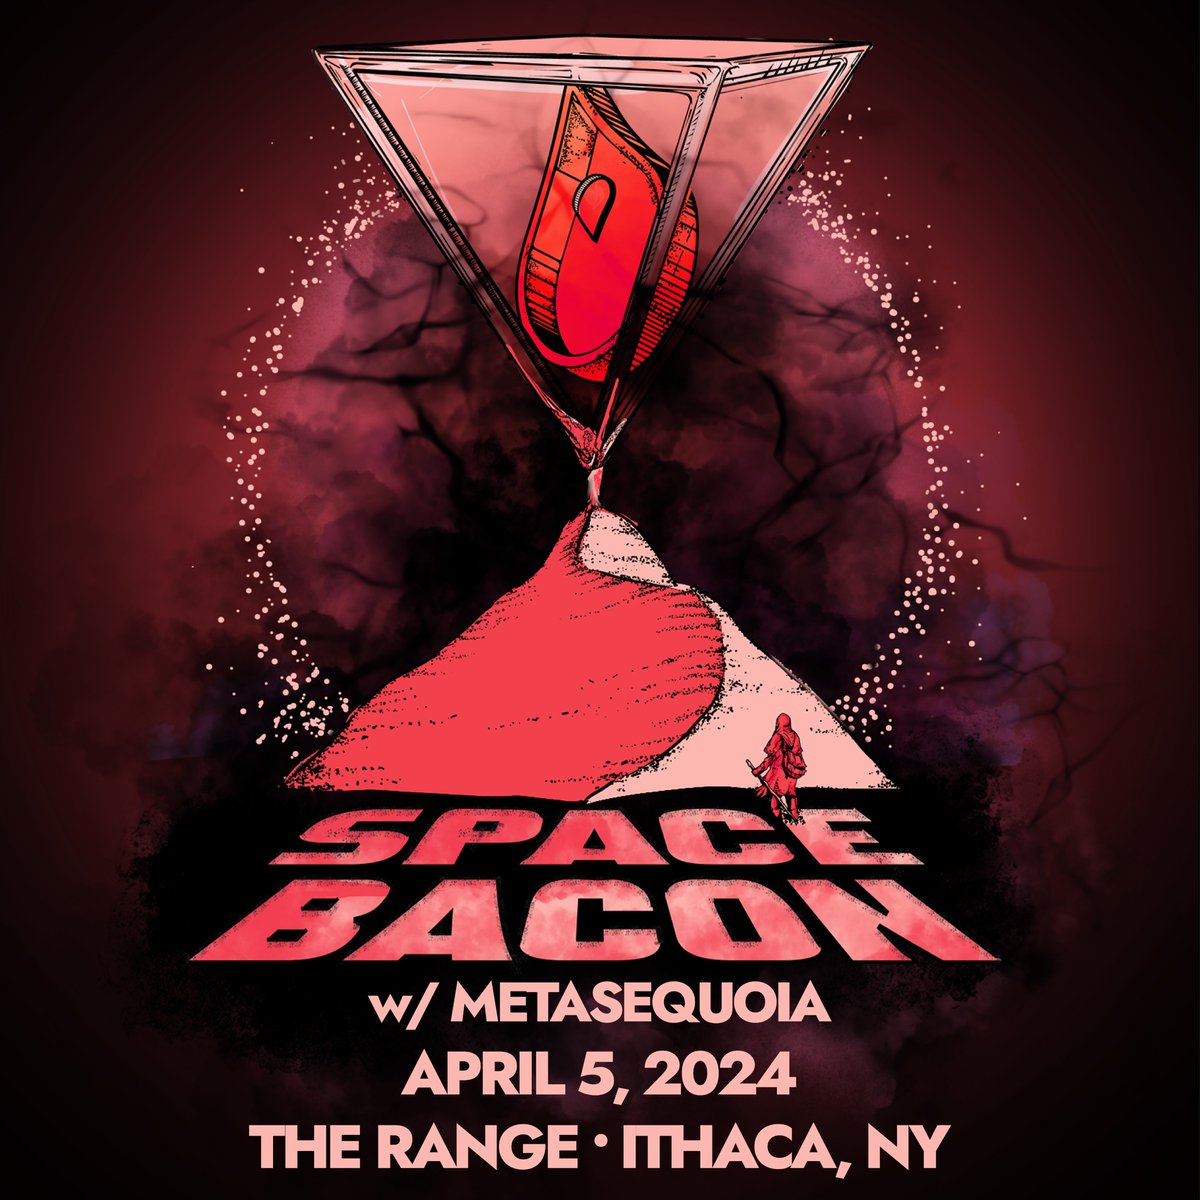 #SpaceBacon heads to western #NewYork this weekend making their first stop at #TheRange in #Ithaca on Friday with #Metasequoia.